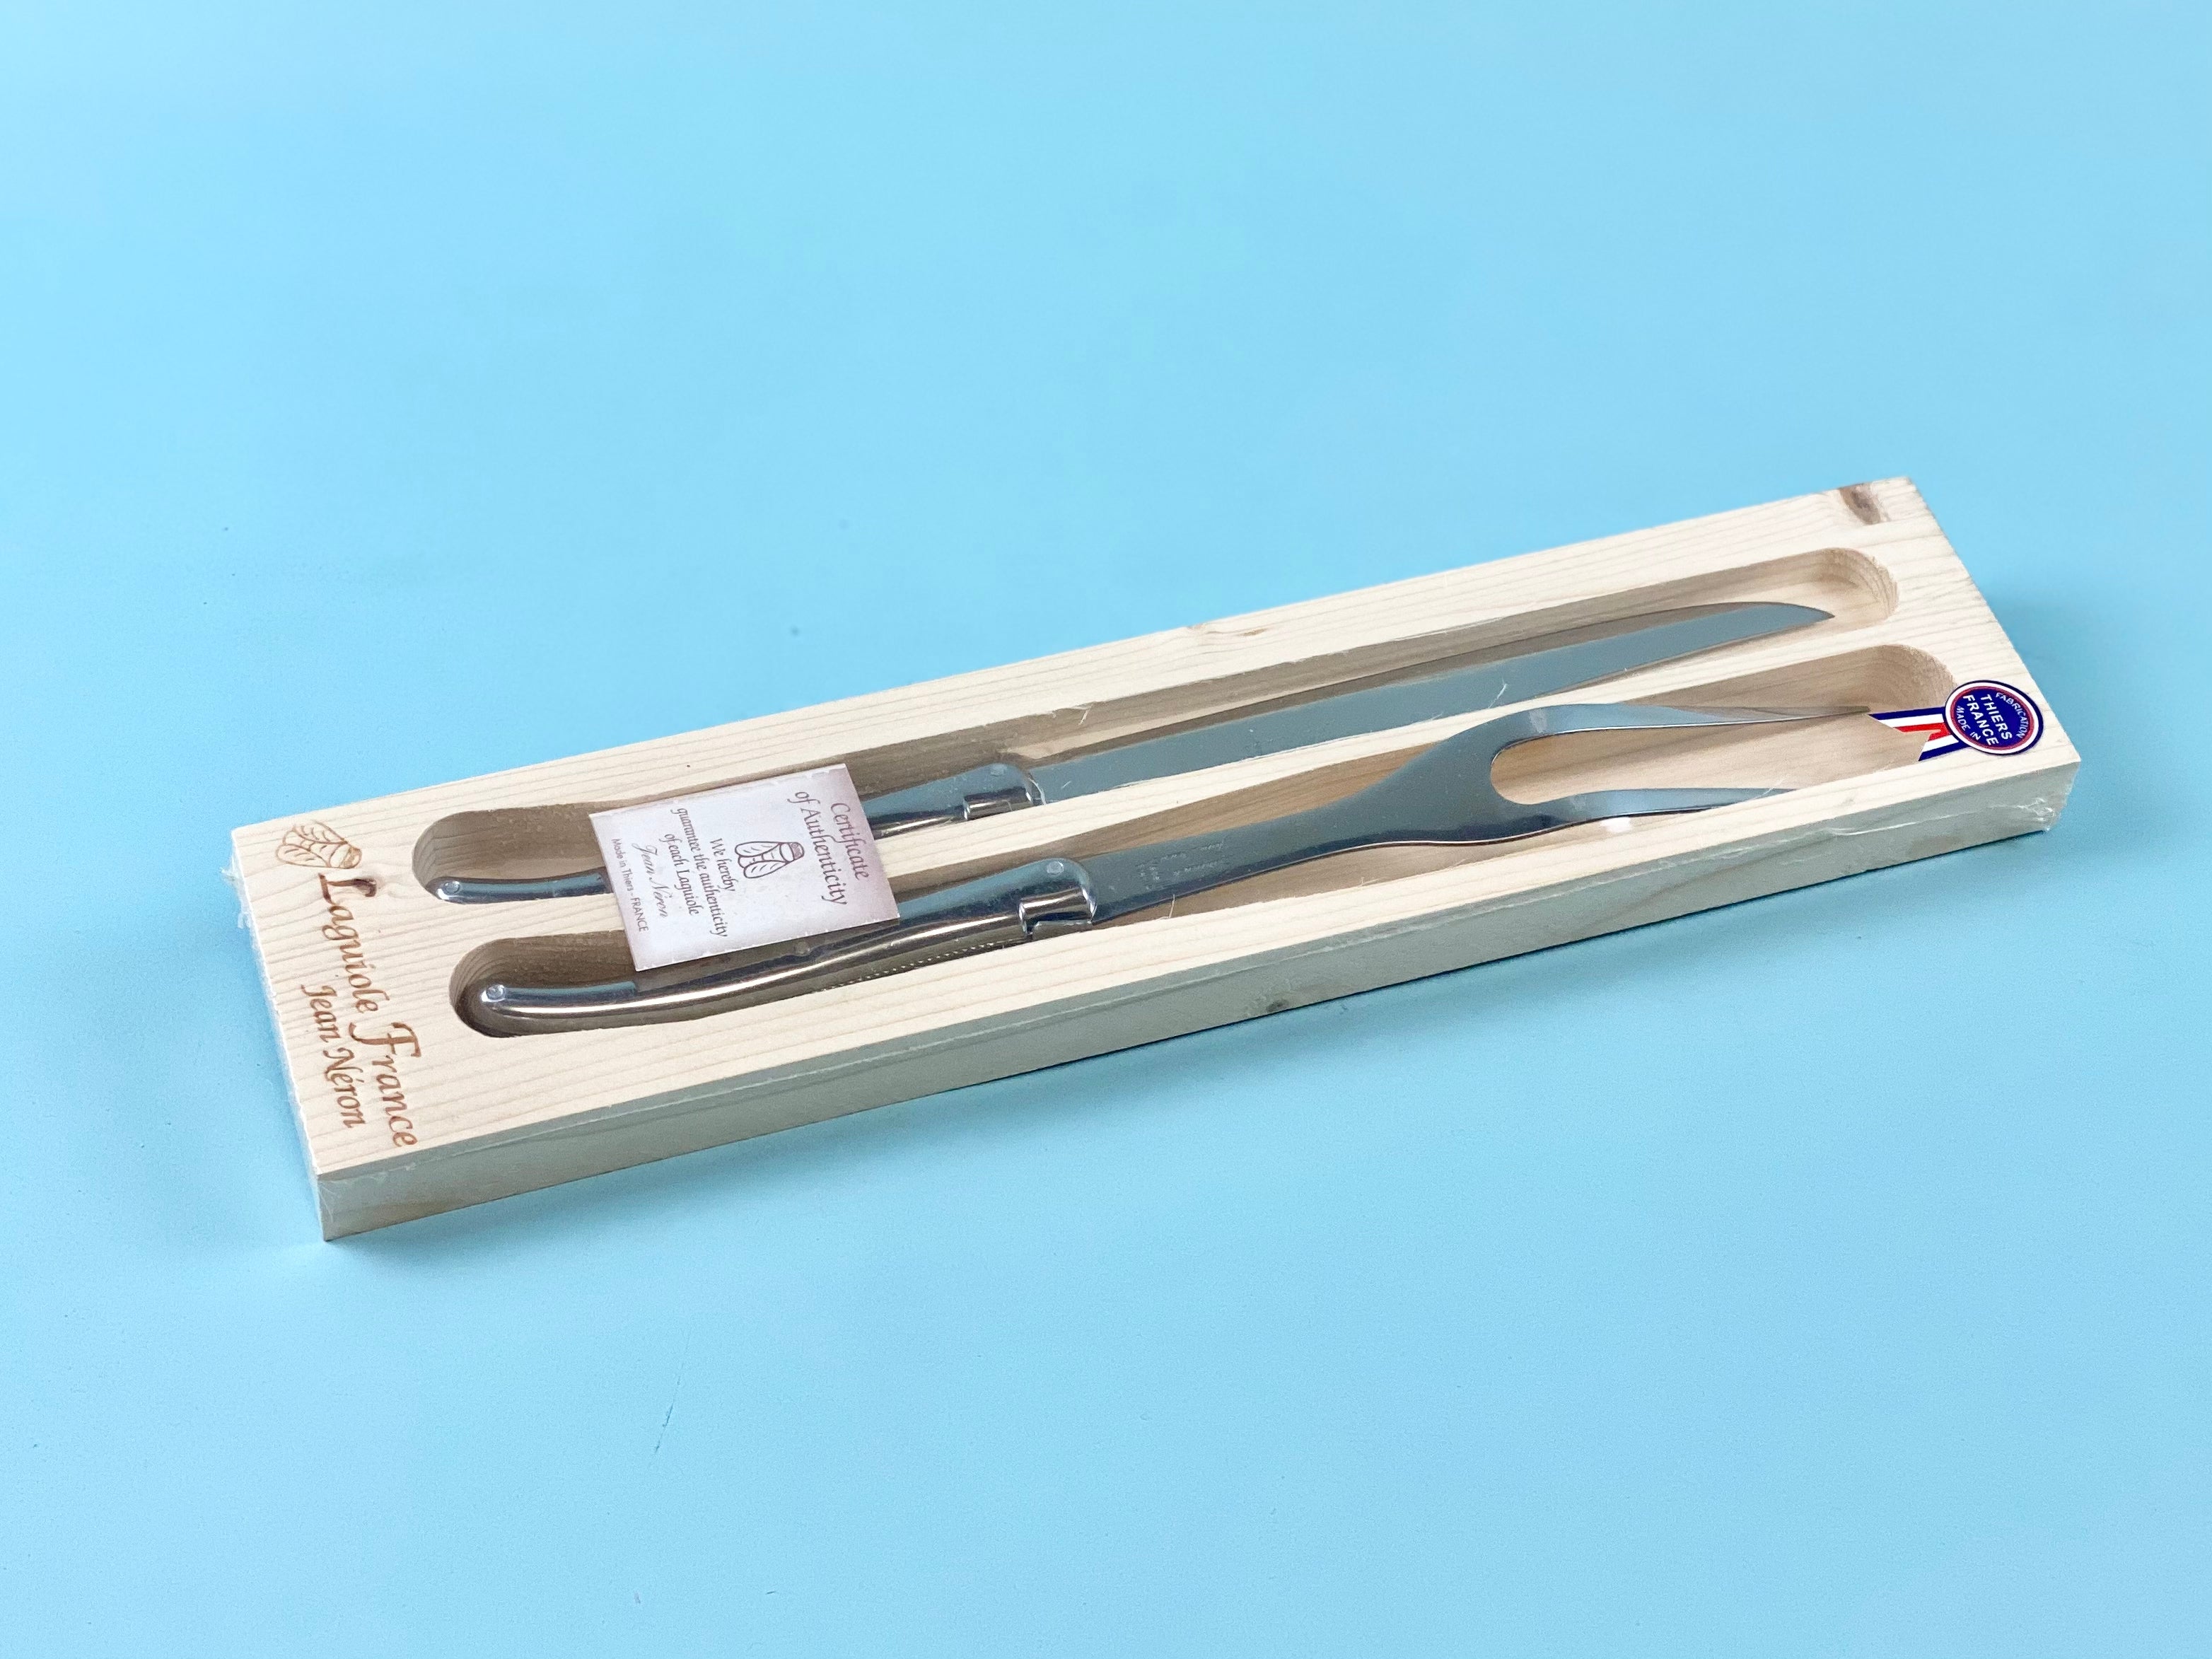 Laguiole Platine Stainless Steel Carving Set in Wood Box Cutlery Set Laguiole Brand_Laguiole Cheese Sets Kitchen_Dinnerware Laguiole Loose Mini Rainbow Utensils Serveware NR790123547PSS